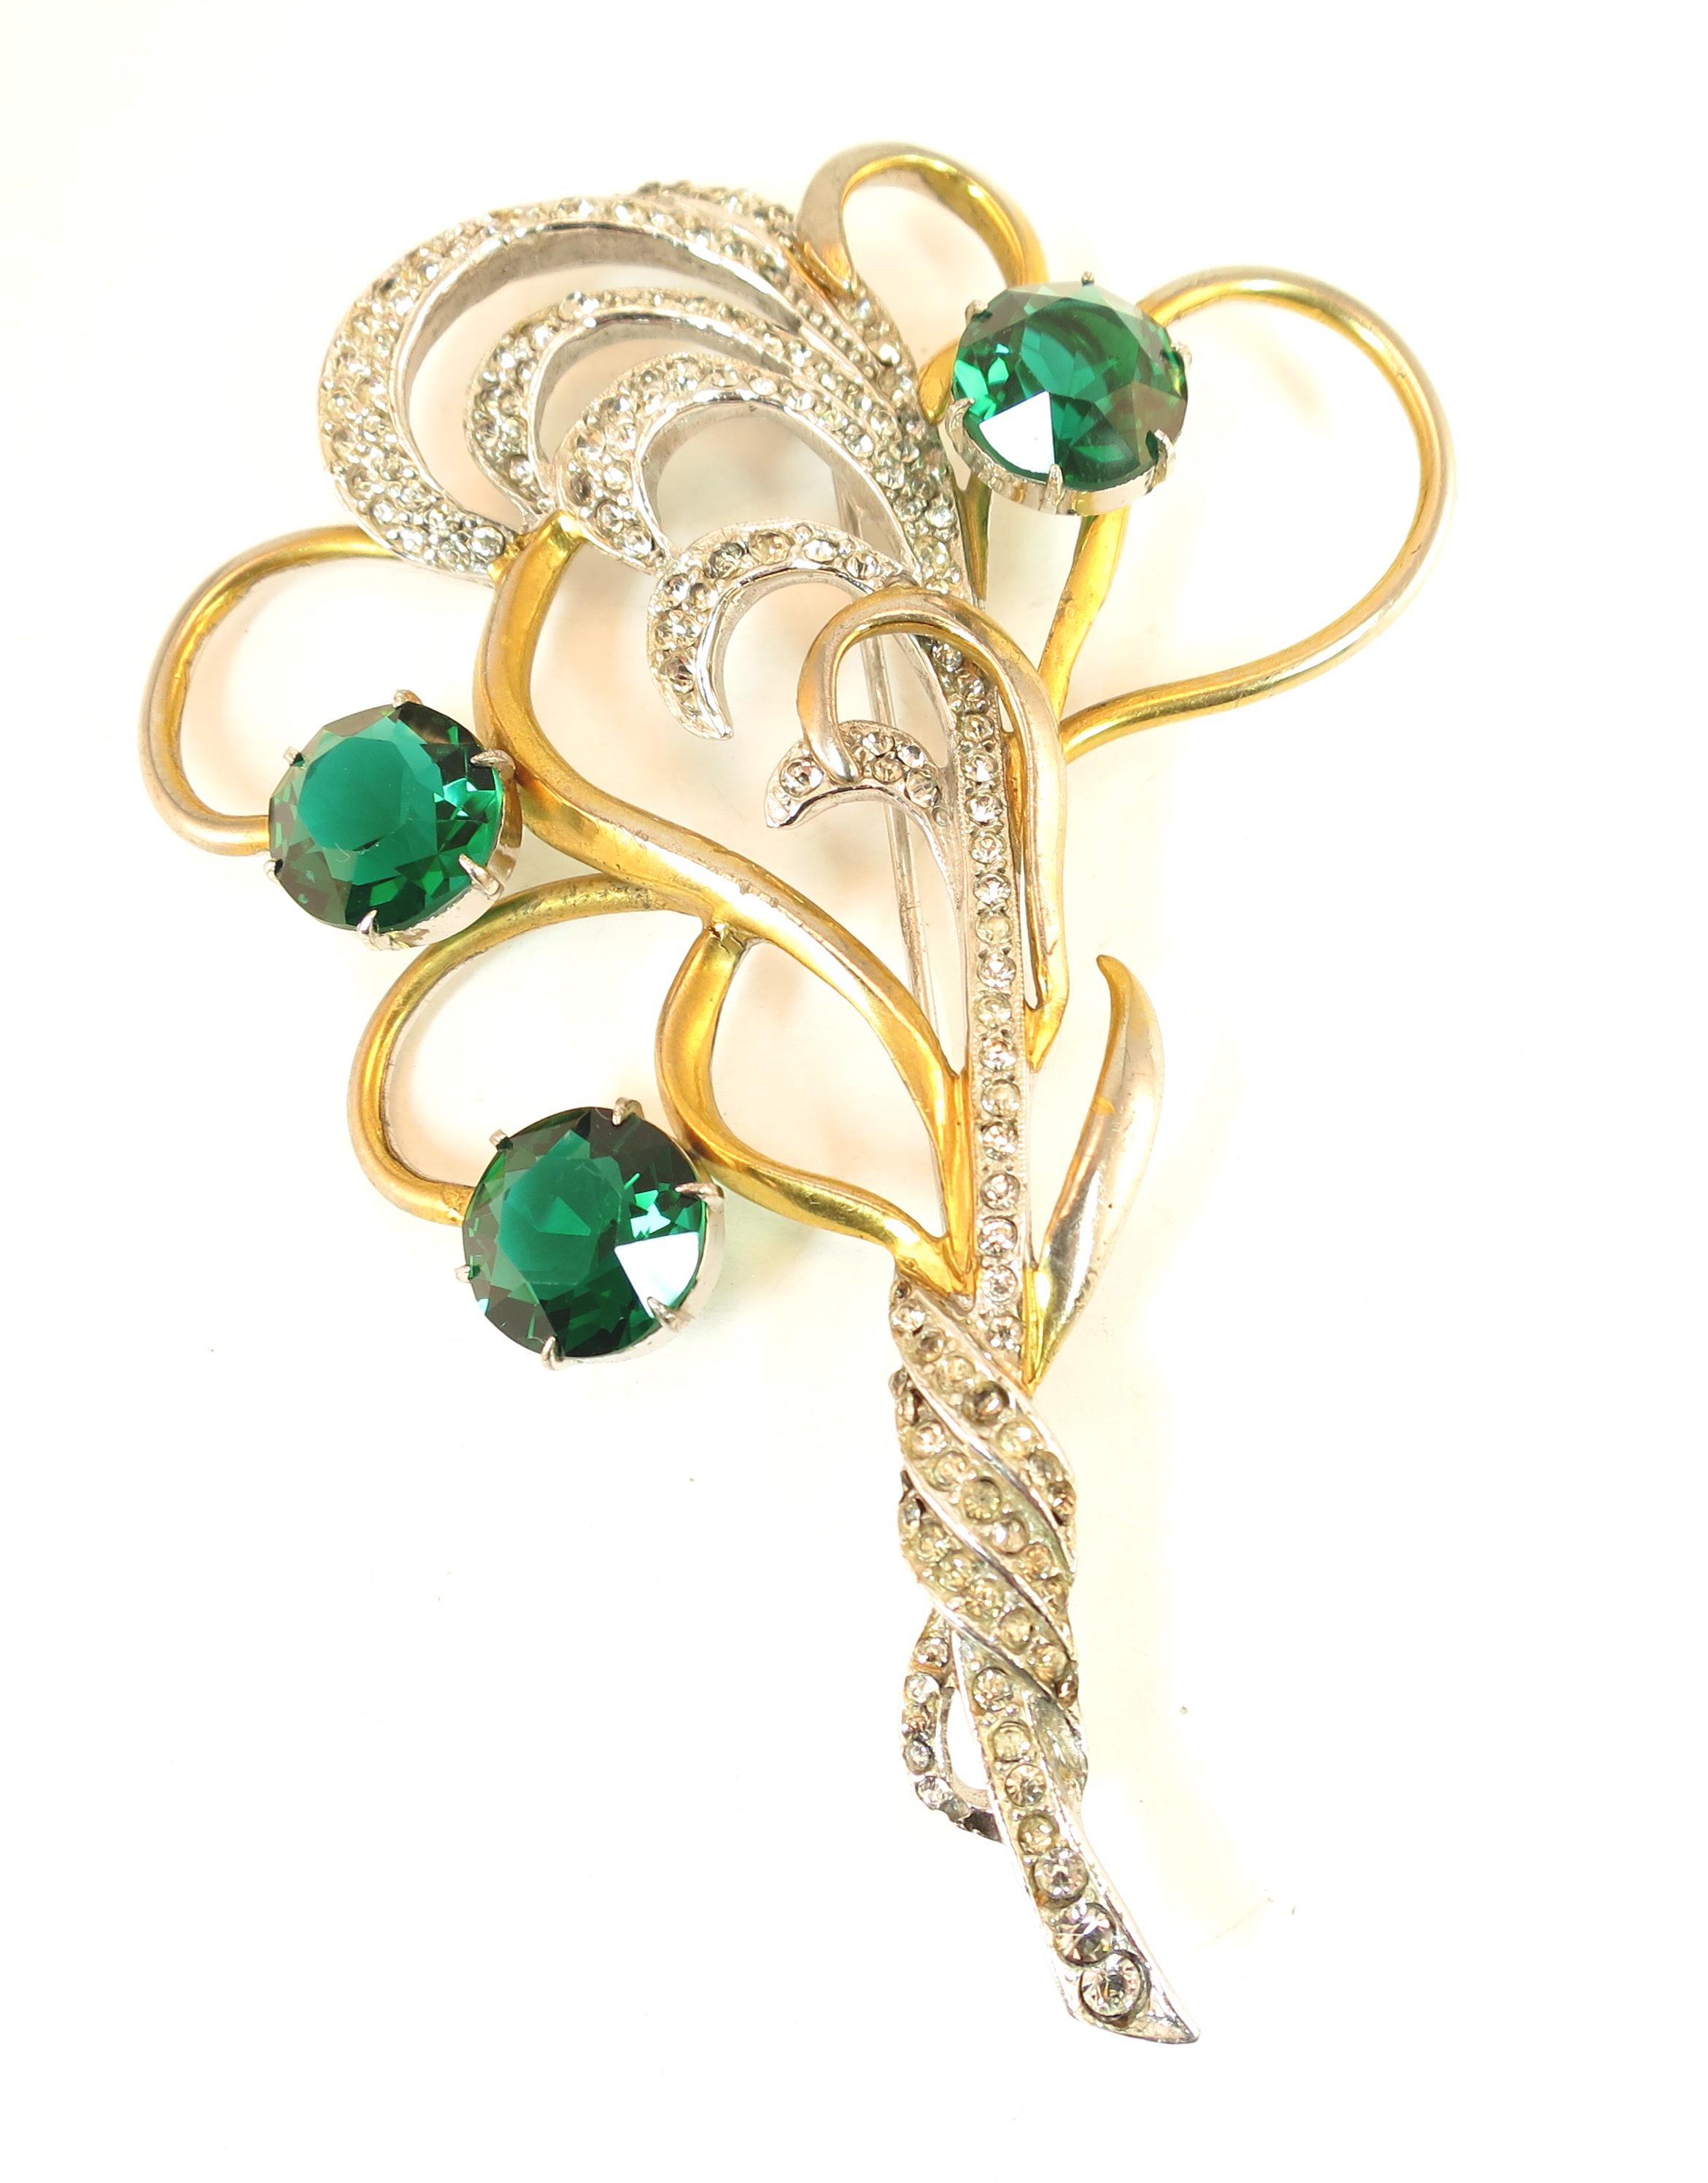 Offered here is a large Mid-Century Silson rhodium-plated sterling brooch with large emerald crystals from the 1940s. The stylized gathered bouquet design is expressed through gold-plated winding tendrils, with a silver spray of pave-set clear